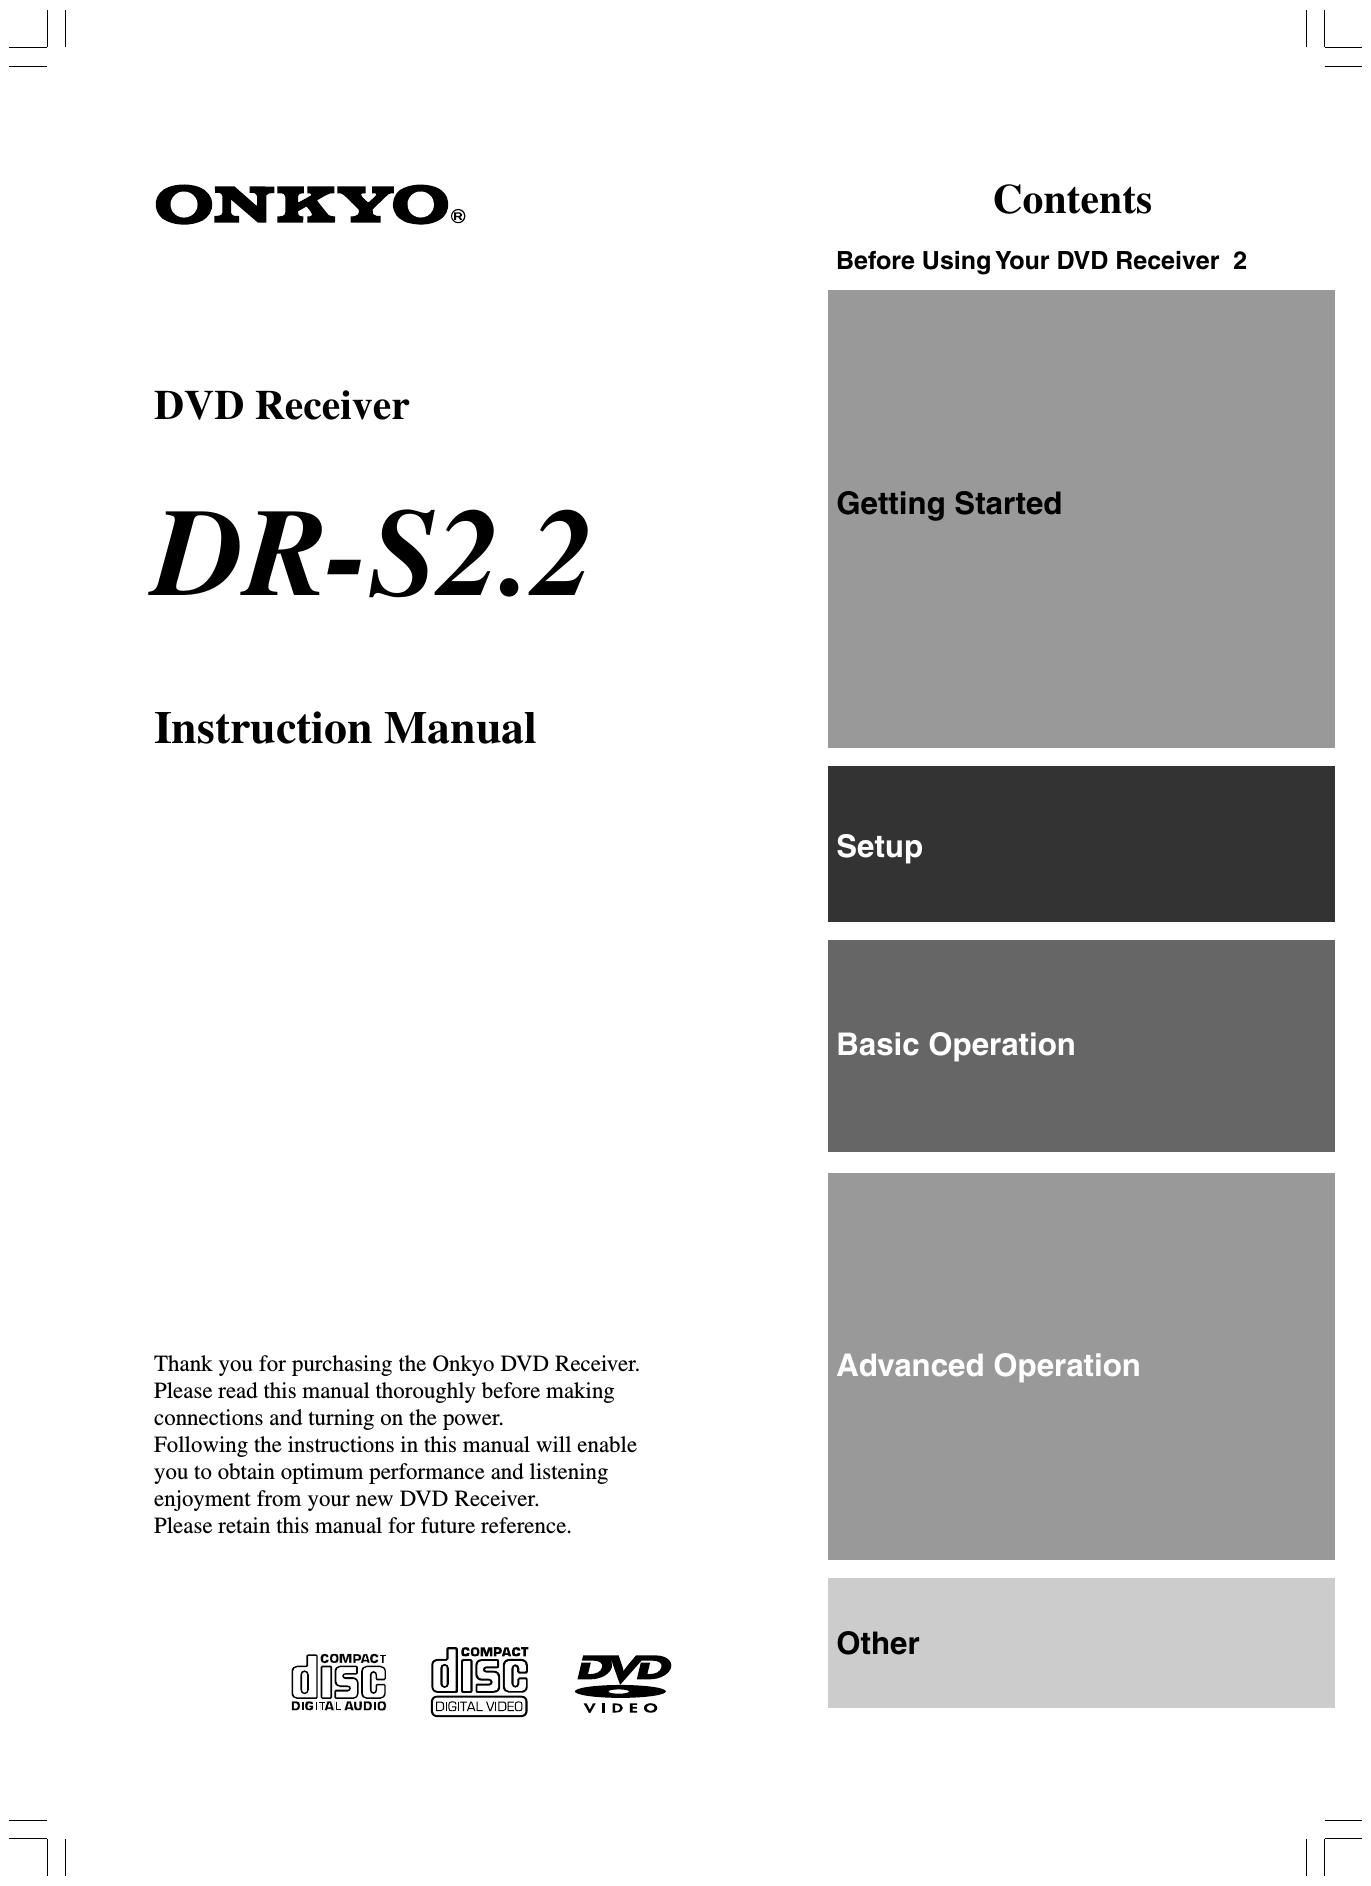 Onkyo DRS 2.2 Owners Manual